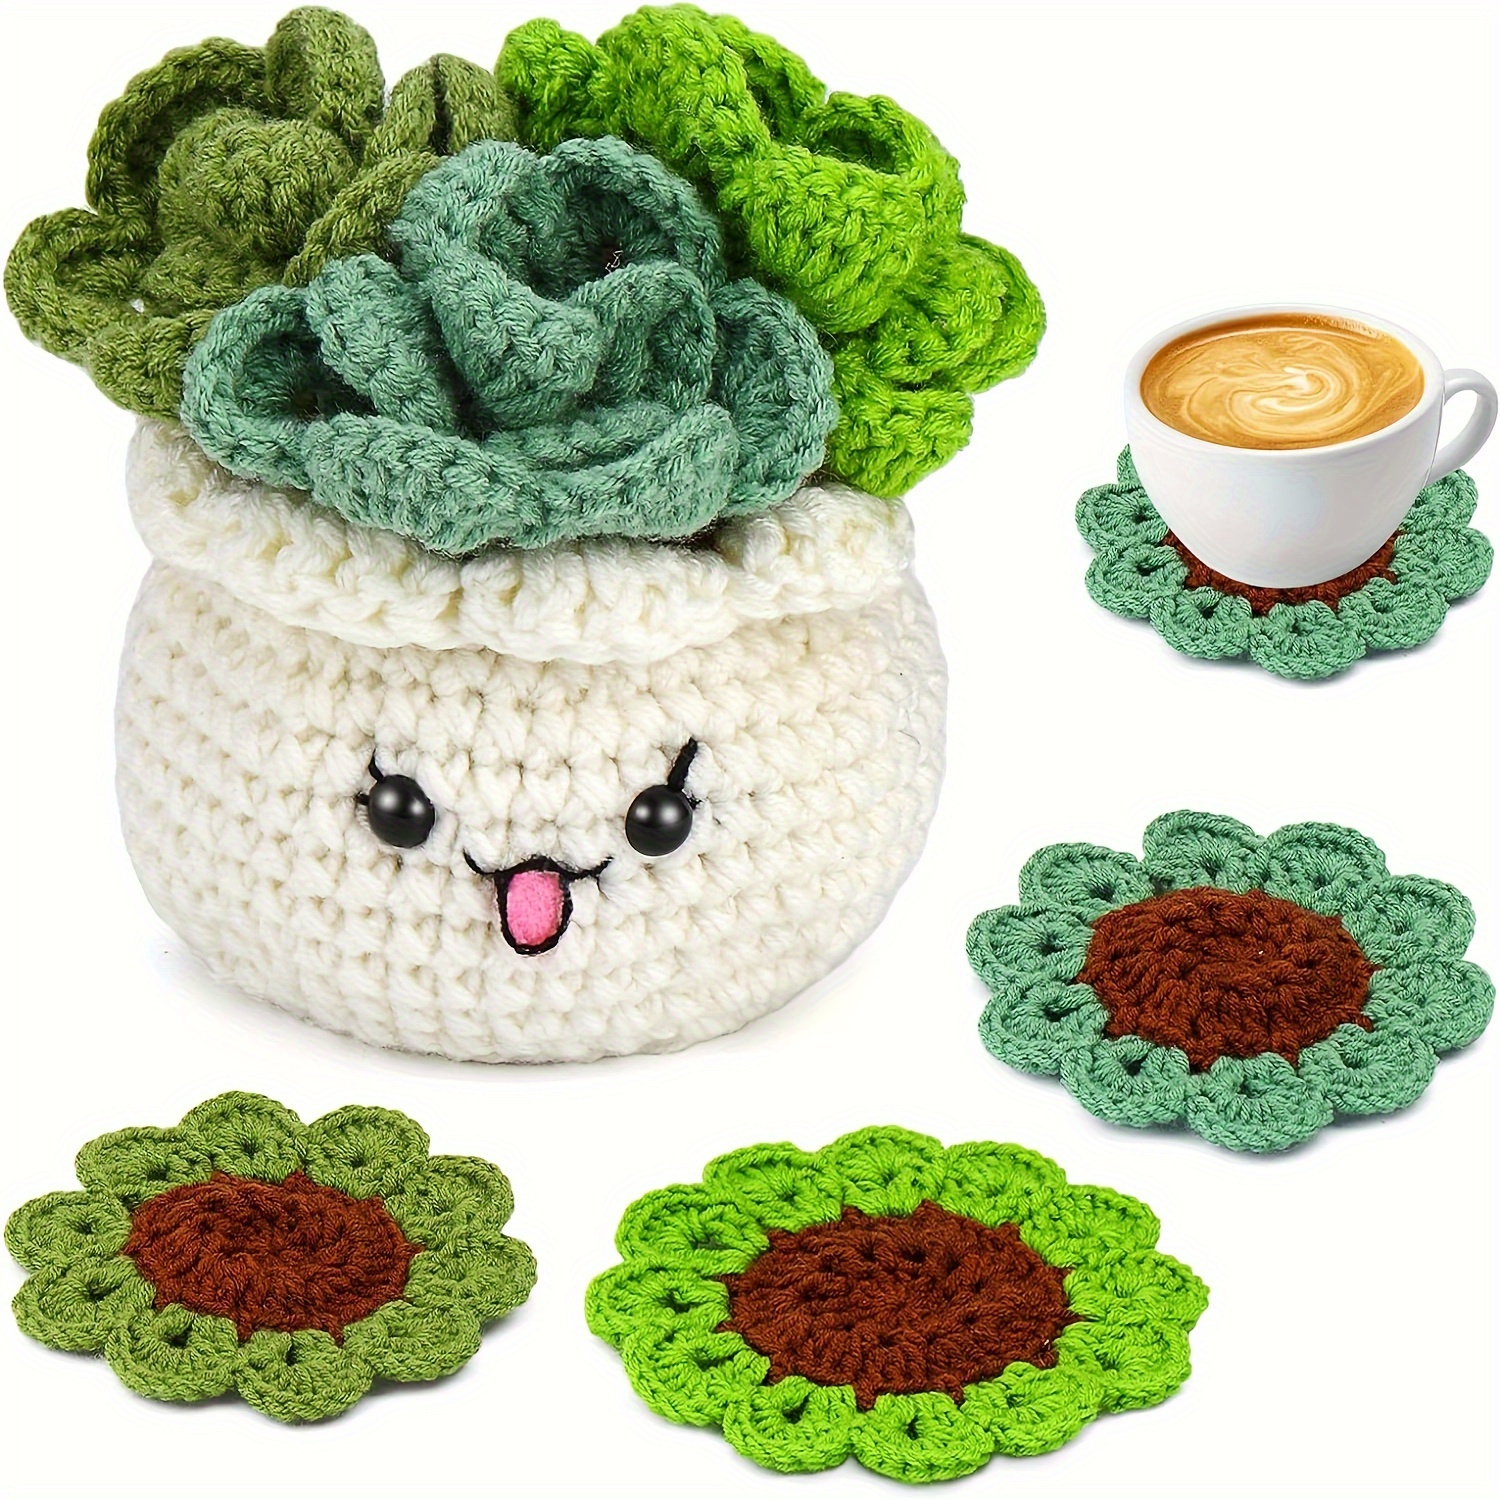 

Beginner Crochet Kit - Includes 4 Coaster And Plant Pot Patterns, Yarn, Hooks, And Easy Tutorials. Perfect For Diy Home Decor For Your Office Or Coffee Table